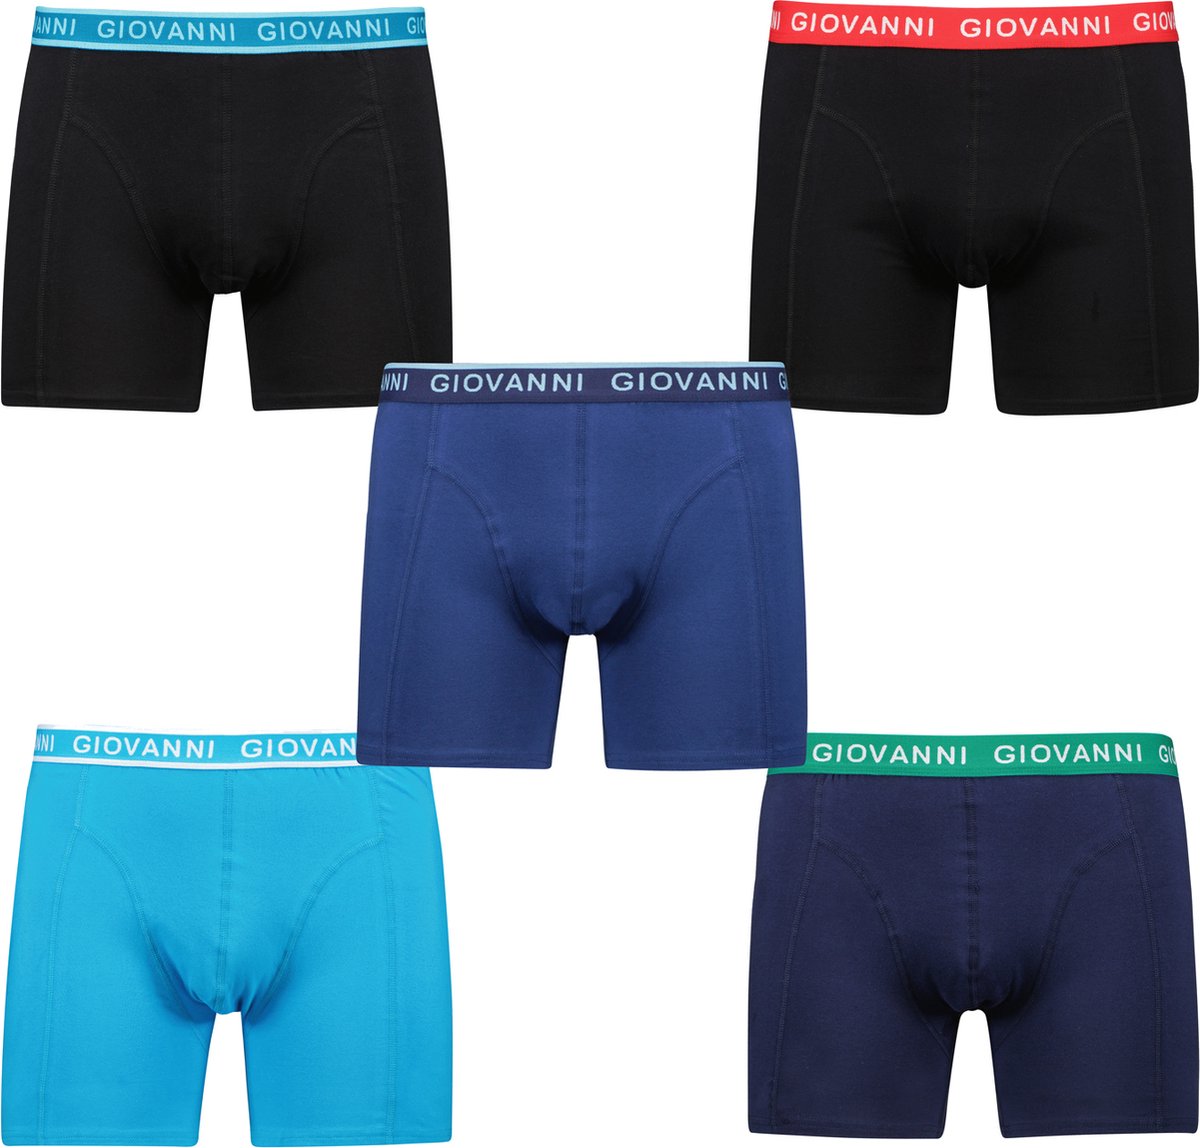 Giovanni Heren Boxershorts 5Pack Montreal M35A | Maat XL